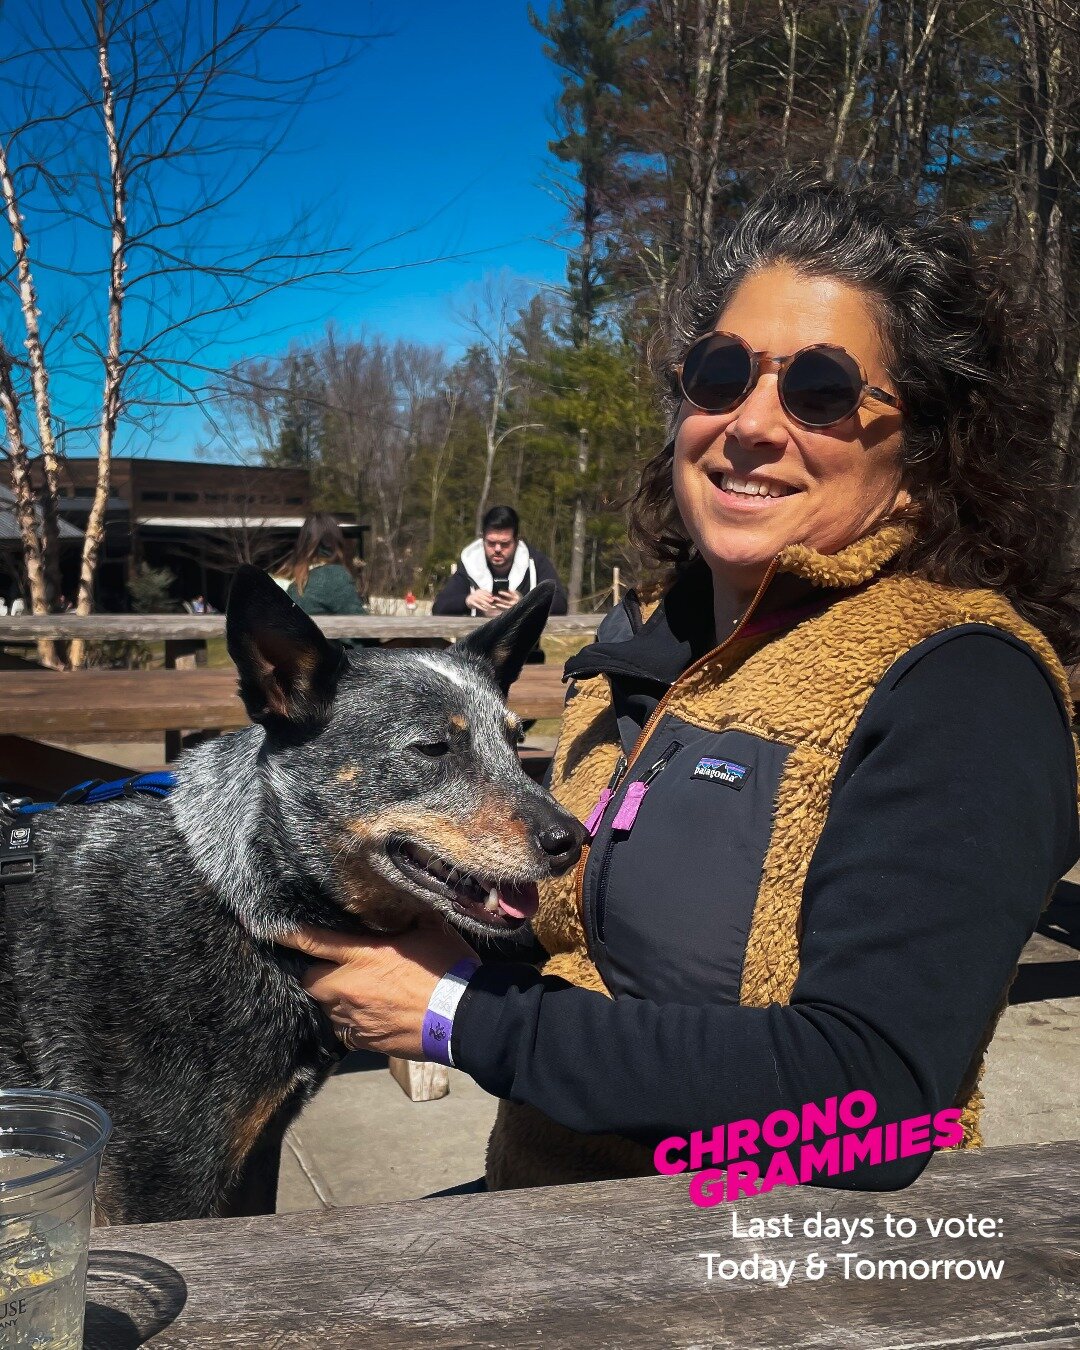 Being able to enjoy outdoor public spaces with your pup is a privilege that comes with great communication and earning your pup's trust. 

Today and tomorrow are the last days to vote in the #chronogrammies 
Link in bio.

 #rhinebeck #redhook #rhinec